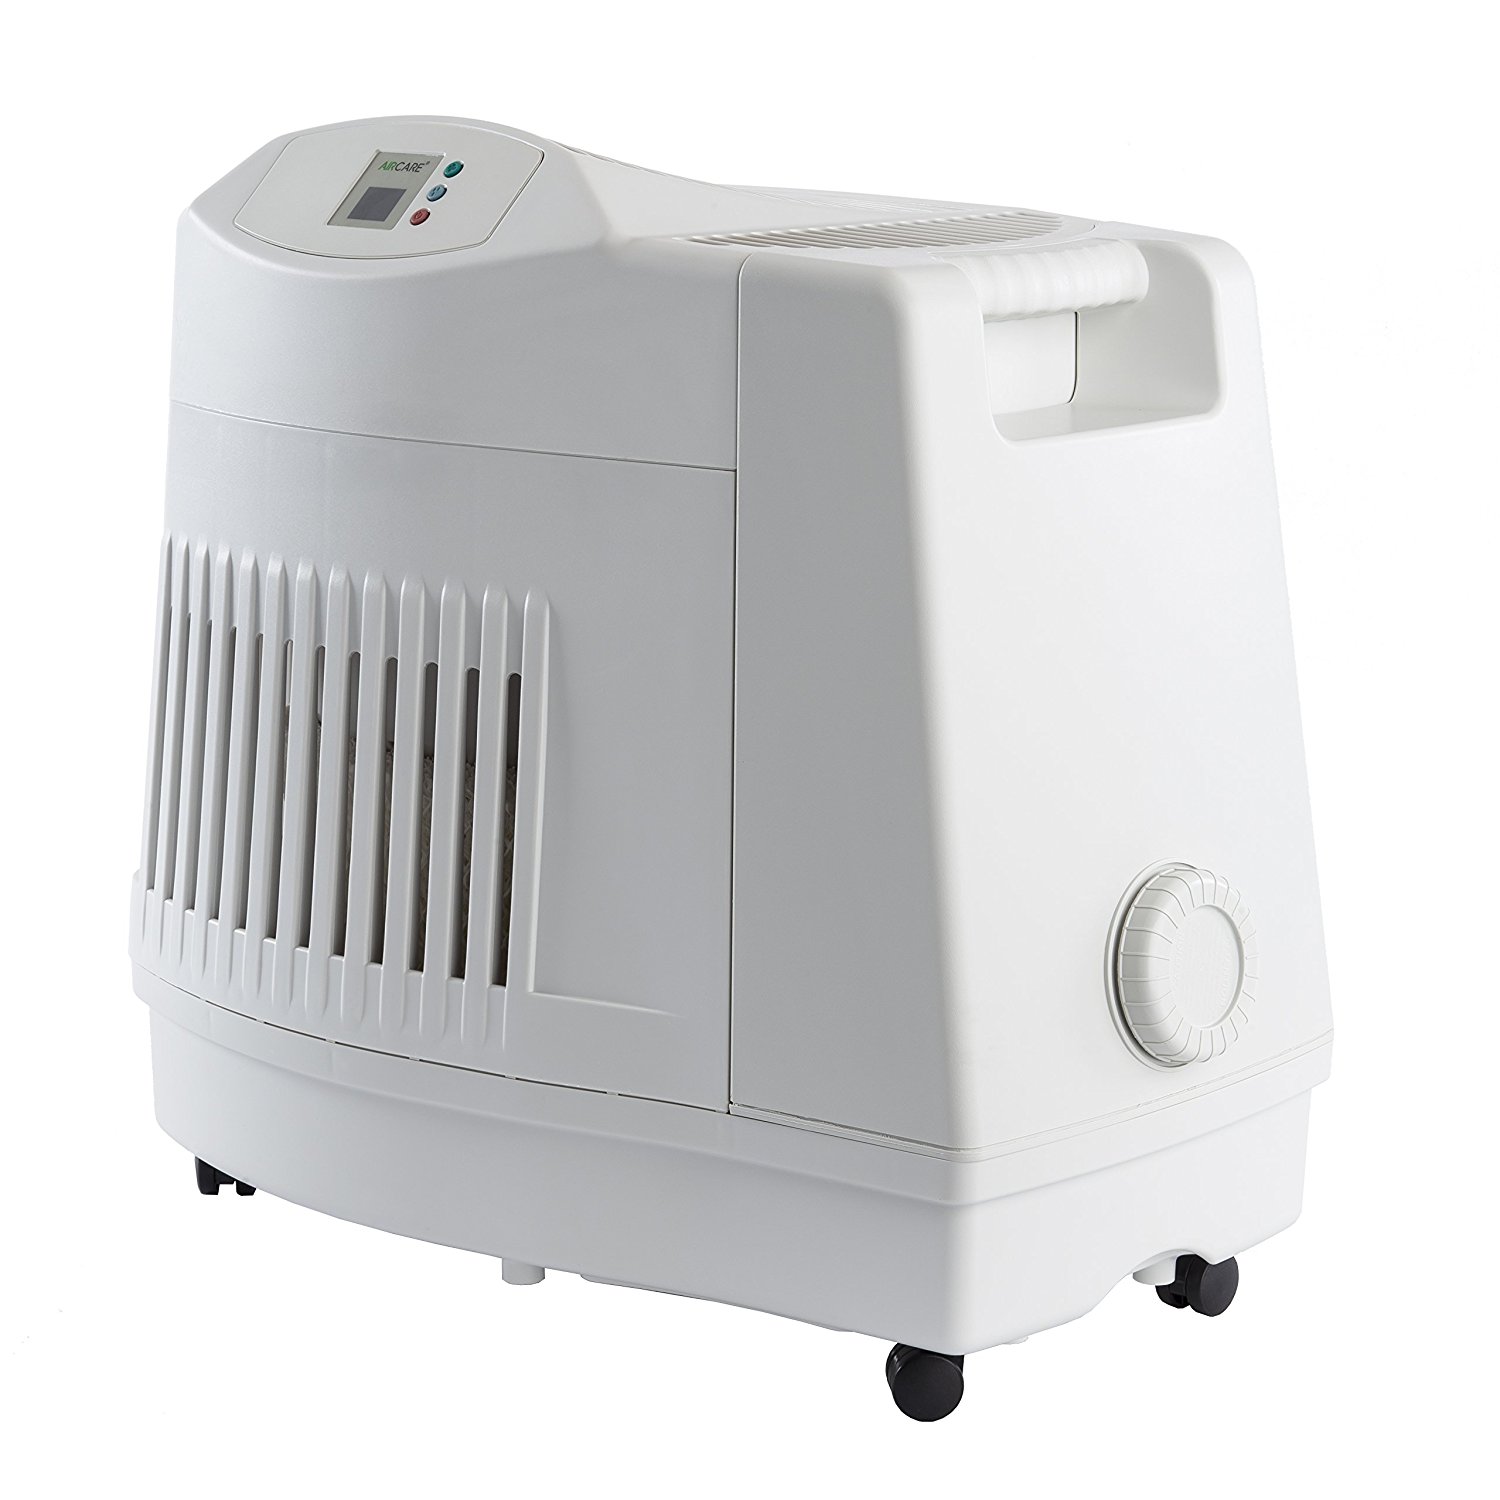 Essick Air Products AIRCARE MA1201 Whole-House Console-Style Evaporative Humidifier, White